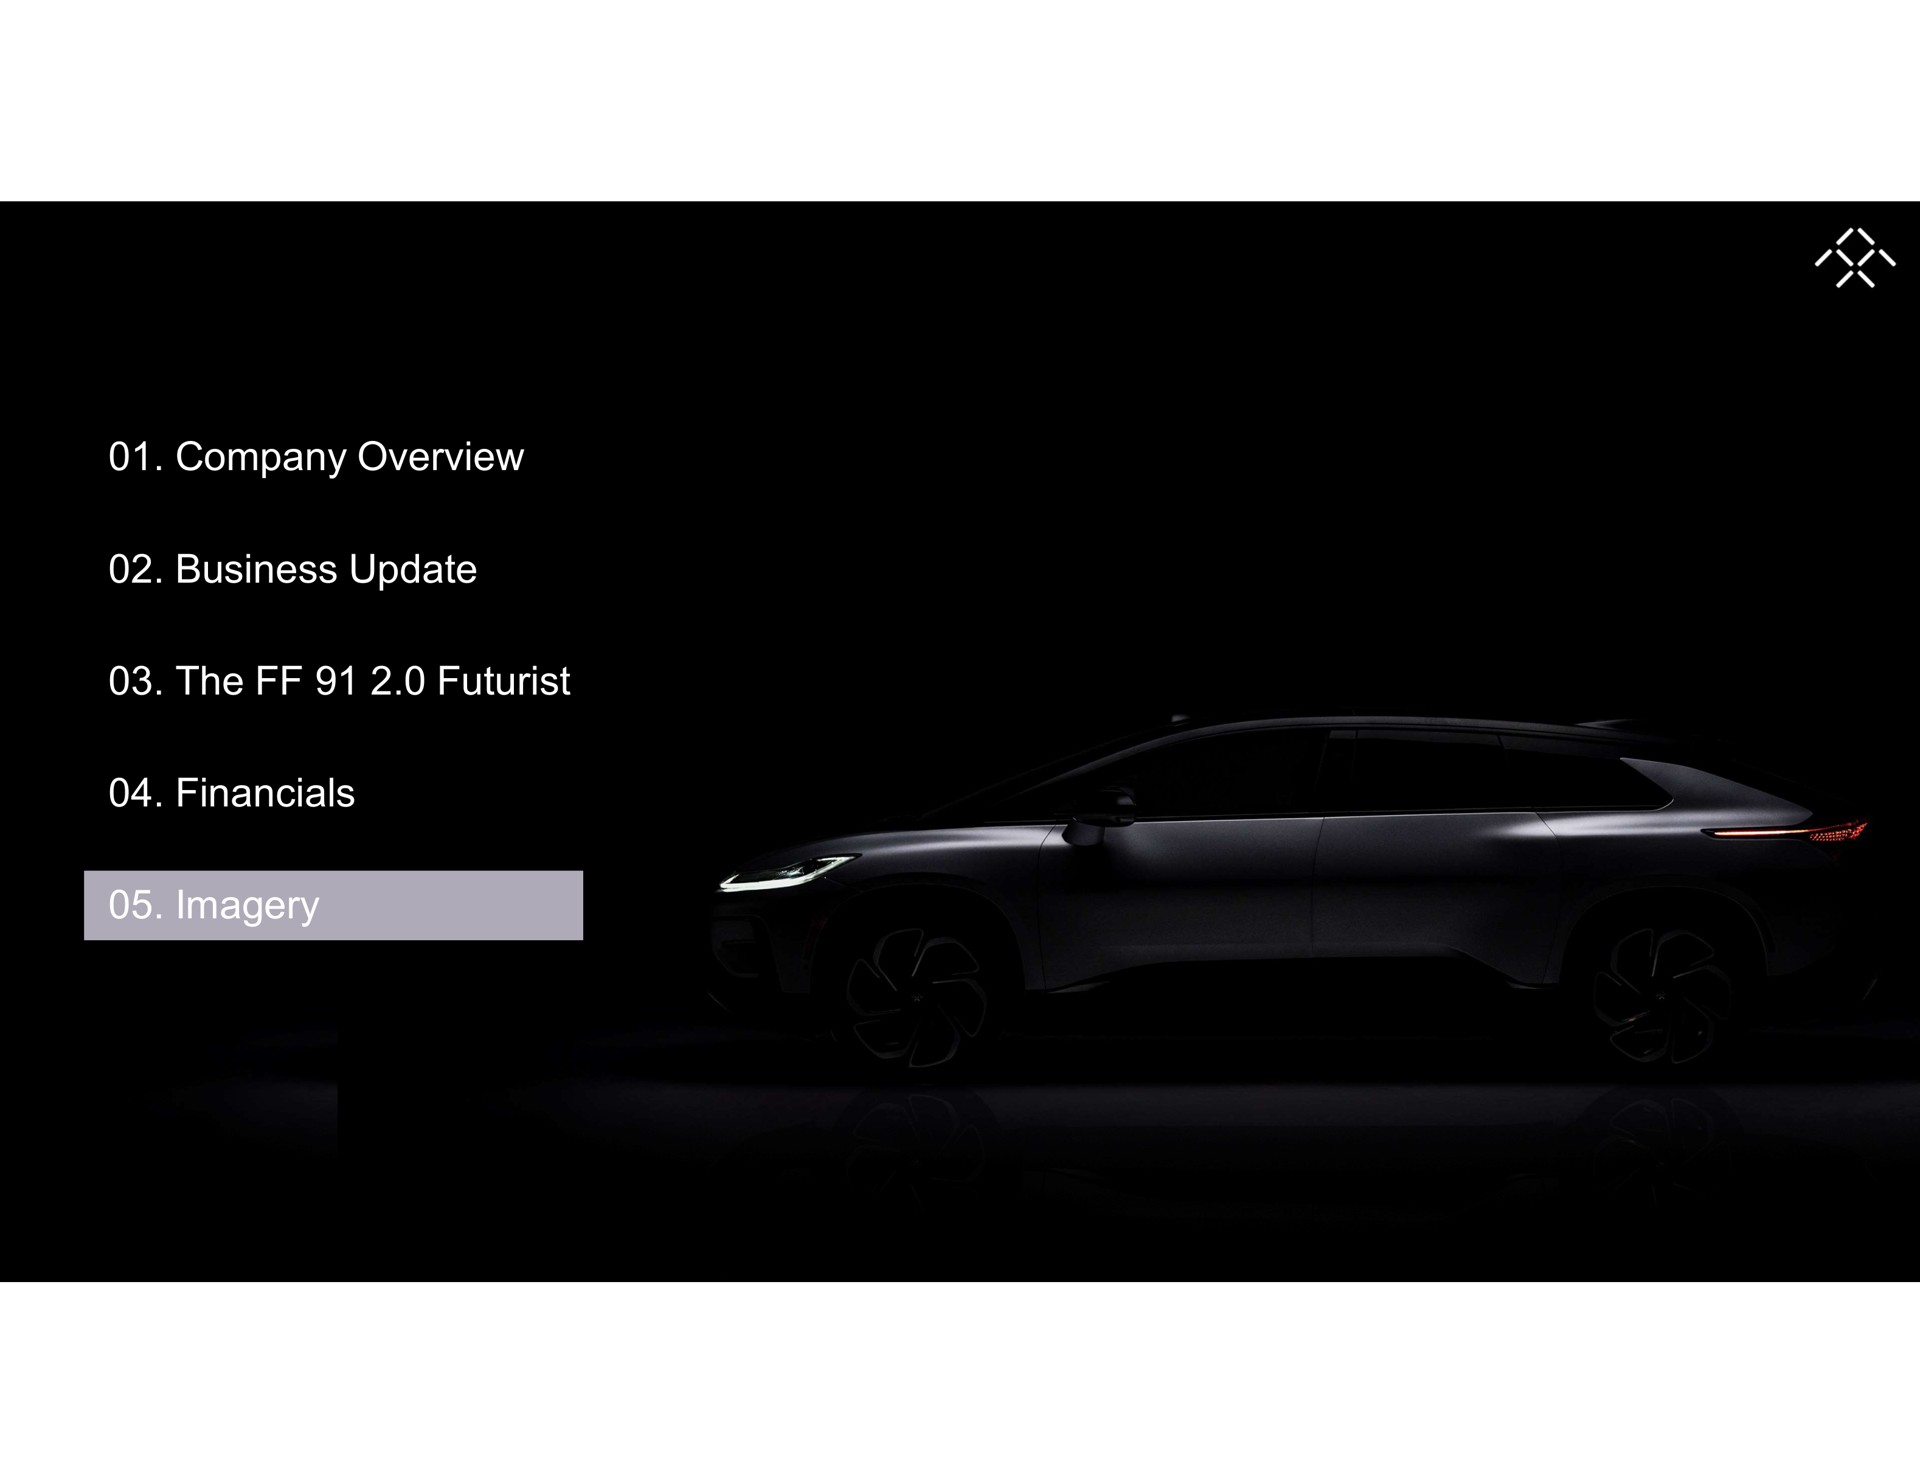 company overview company overview business update business update the futurist the futurist imagery imagery | Faraday Future